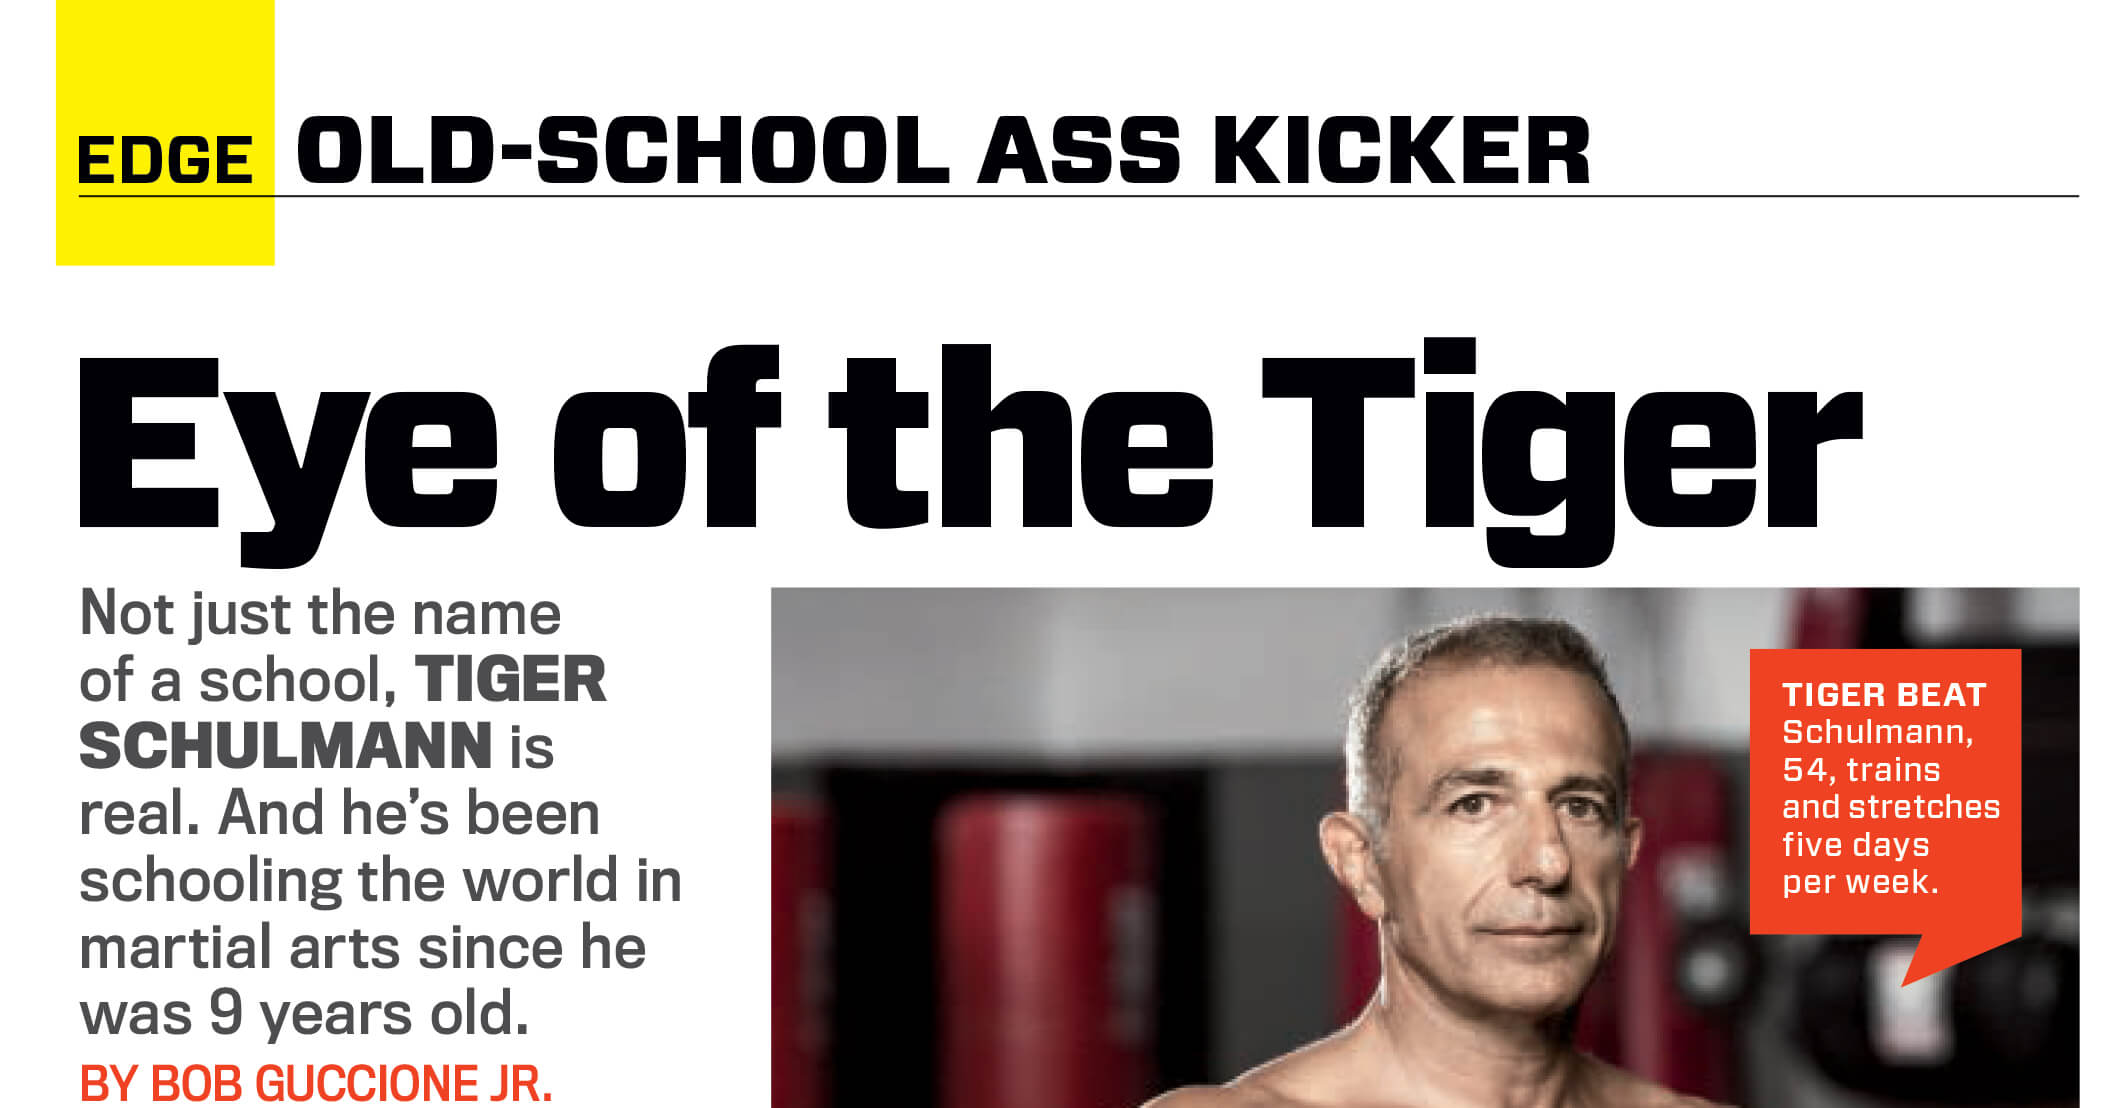 Tiger Schullman's photo in a magazine article with black text